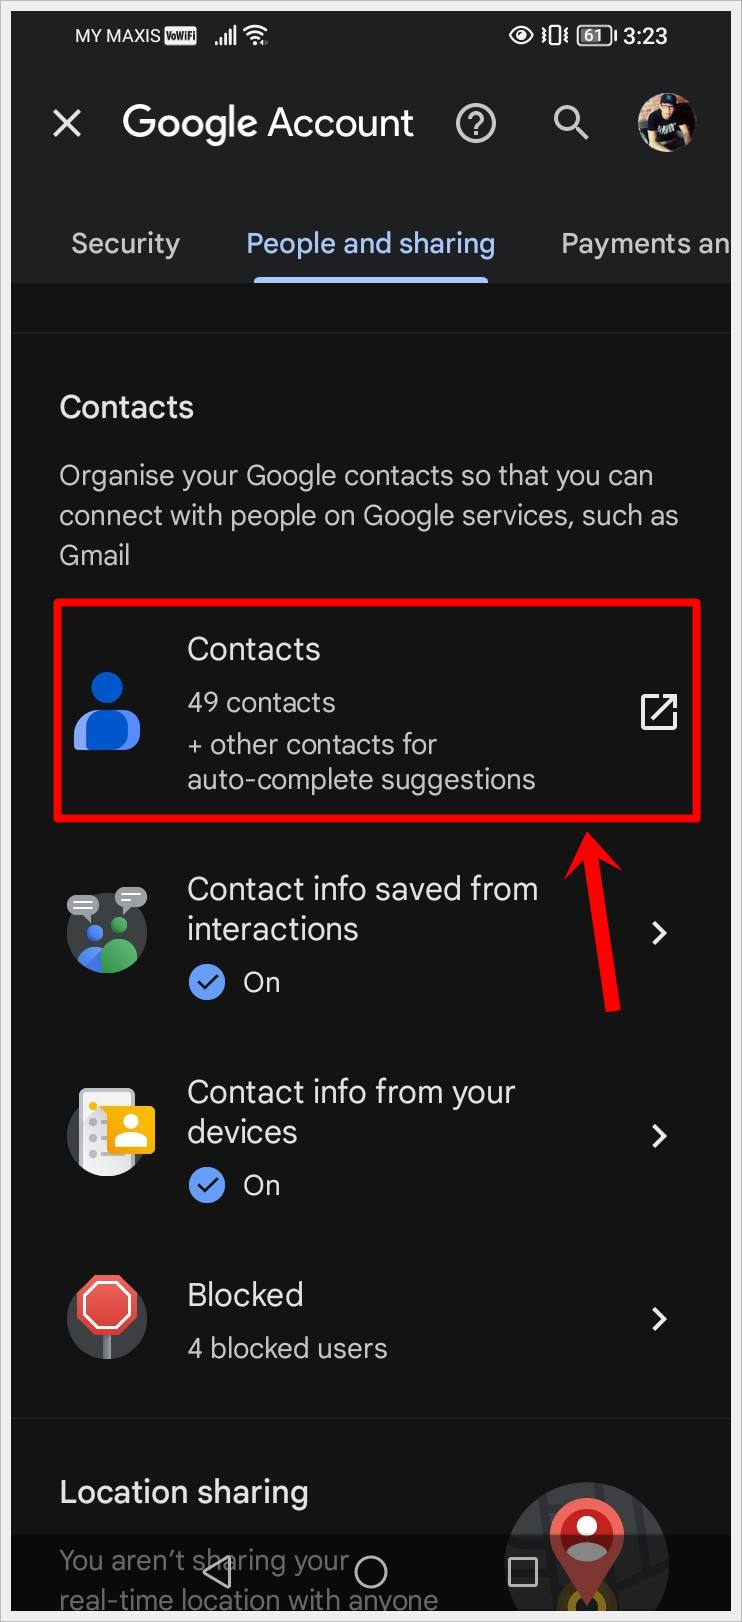 This is a screenshot of the user's Google Account page on an Android phone with the 'Contacts' section highlighted.